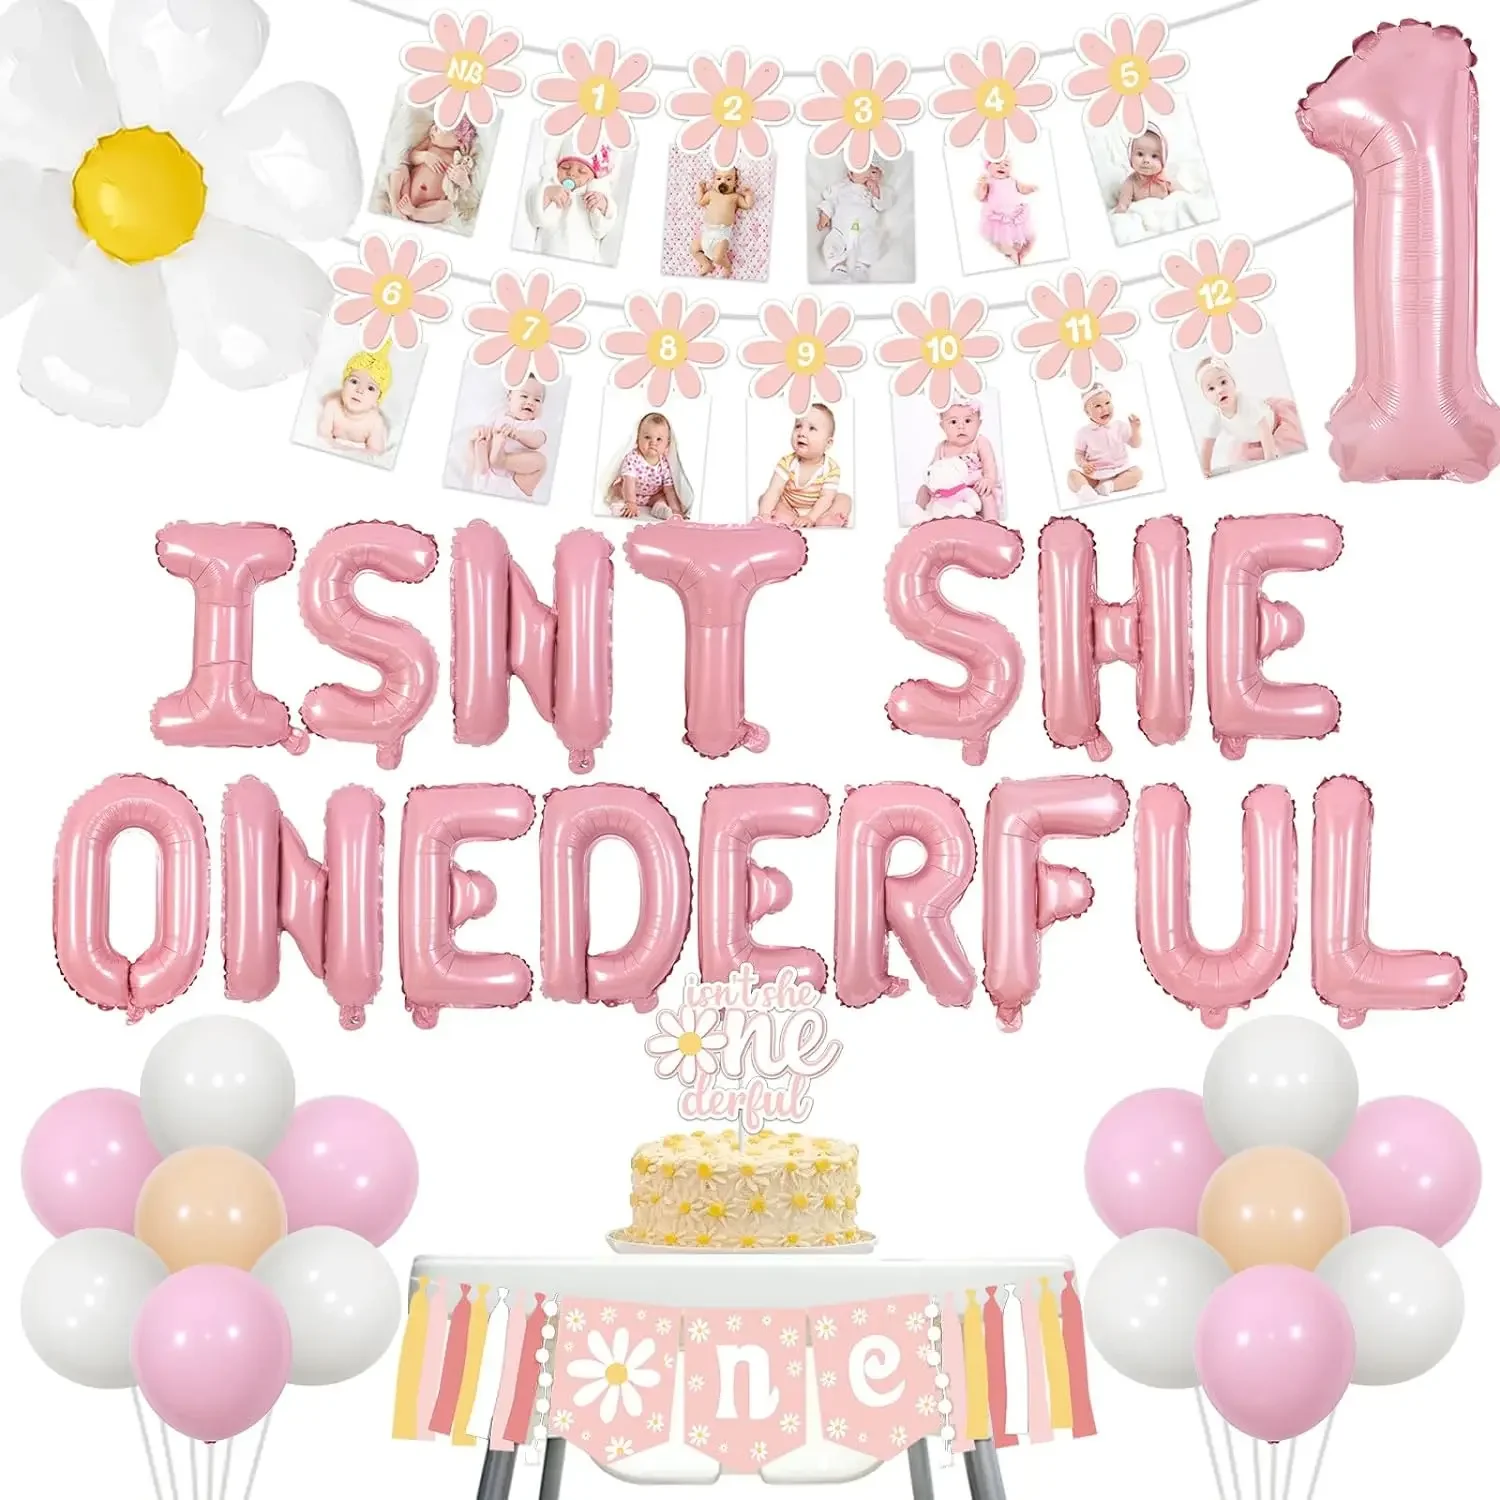 

Daisy decoration for 1st birthday, party supplies, happy birthday, with a number of balloons and a high chair banner